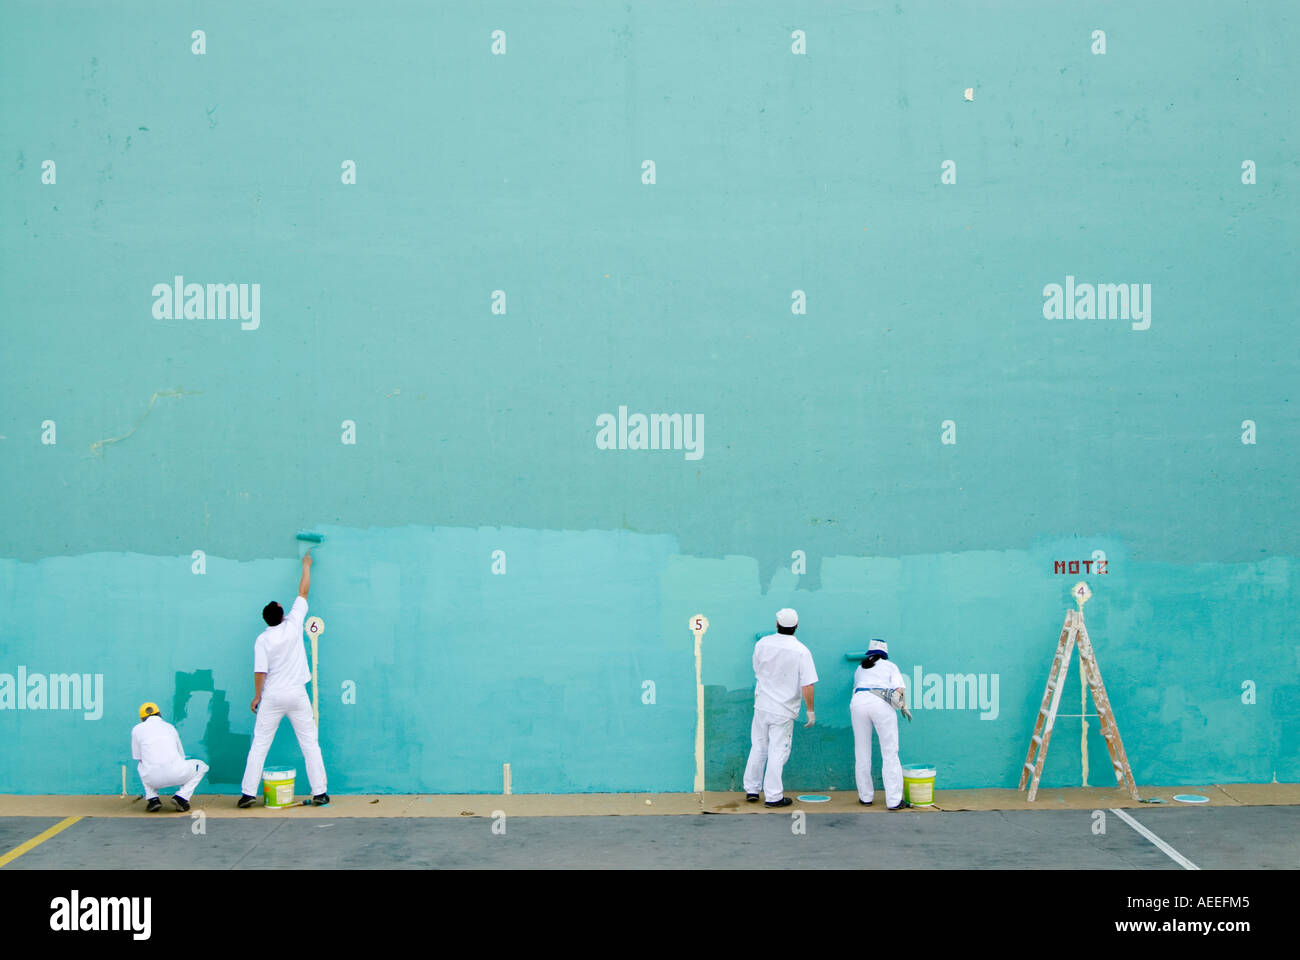 Team of workers painting large blank wall turquoise for game of pelota, Spain Stock Photo